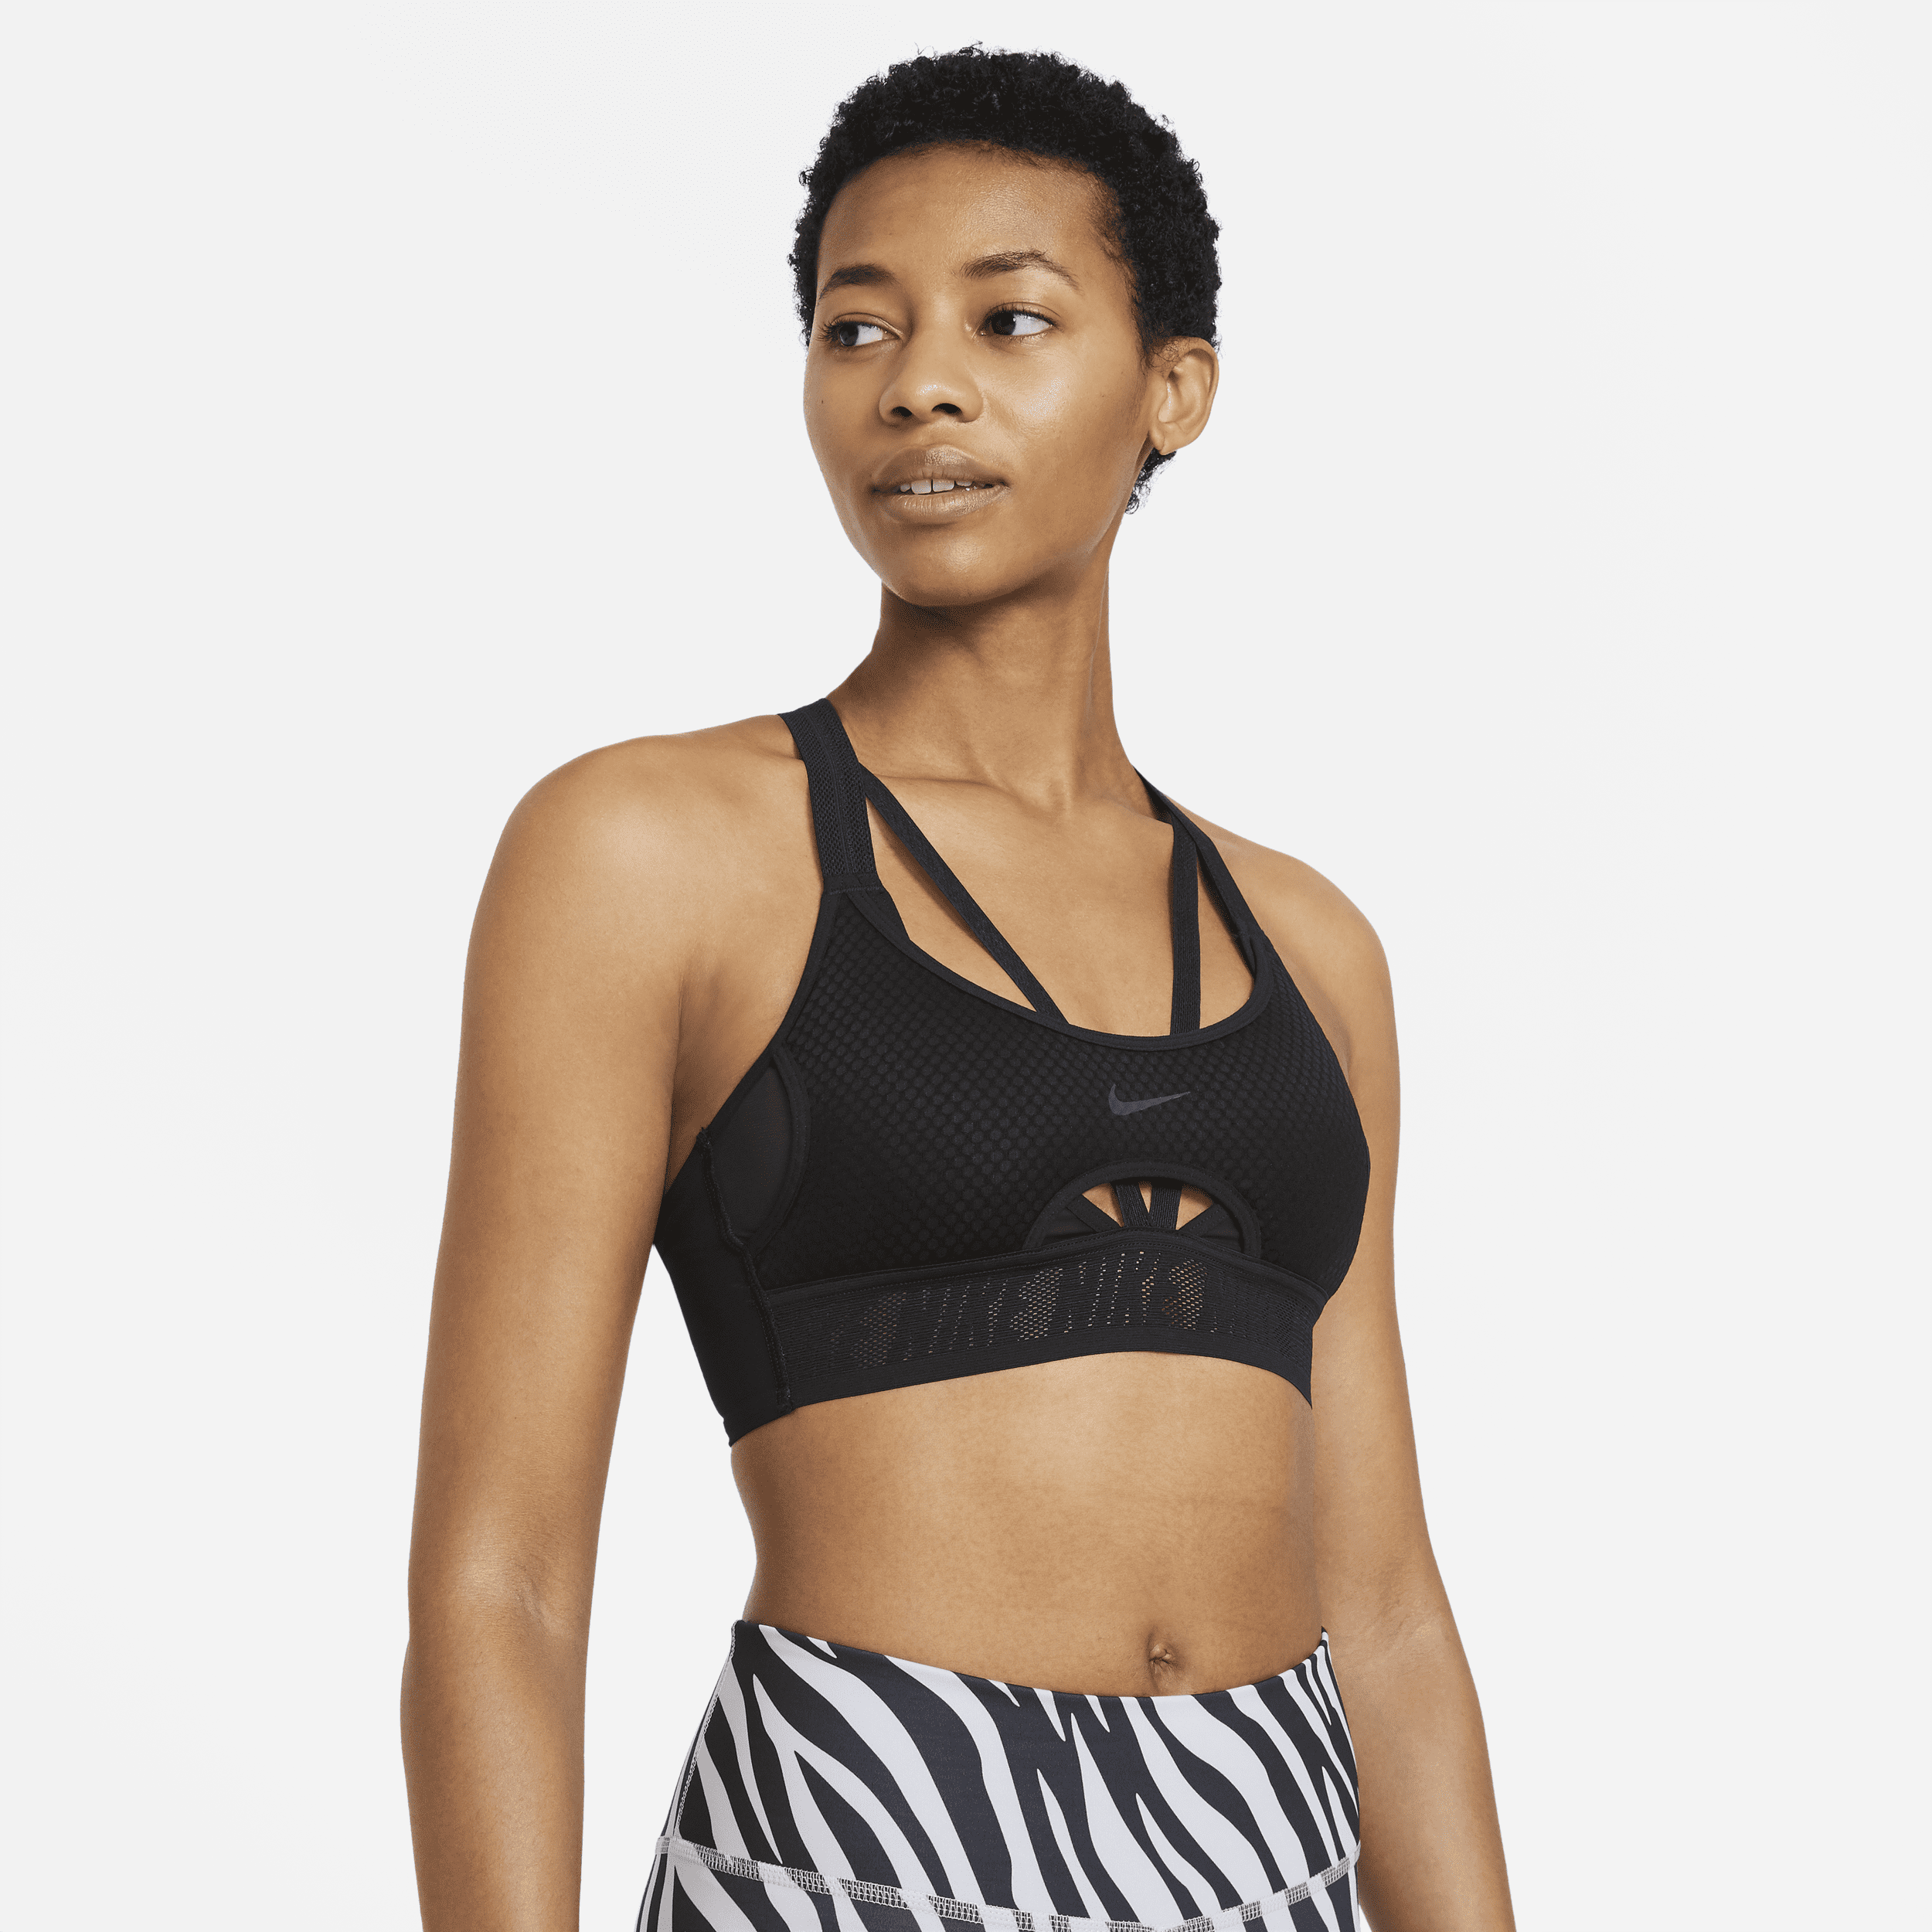 Shop Dri-FIT ADV Indy Women's Light-Support Padded Strappy Sports Bra